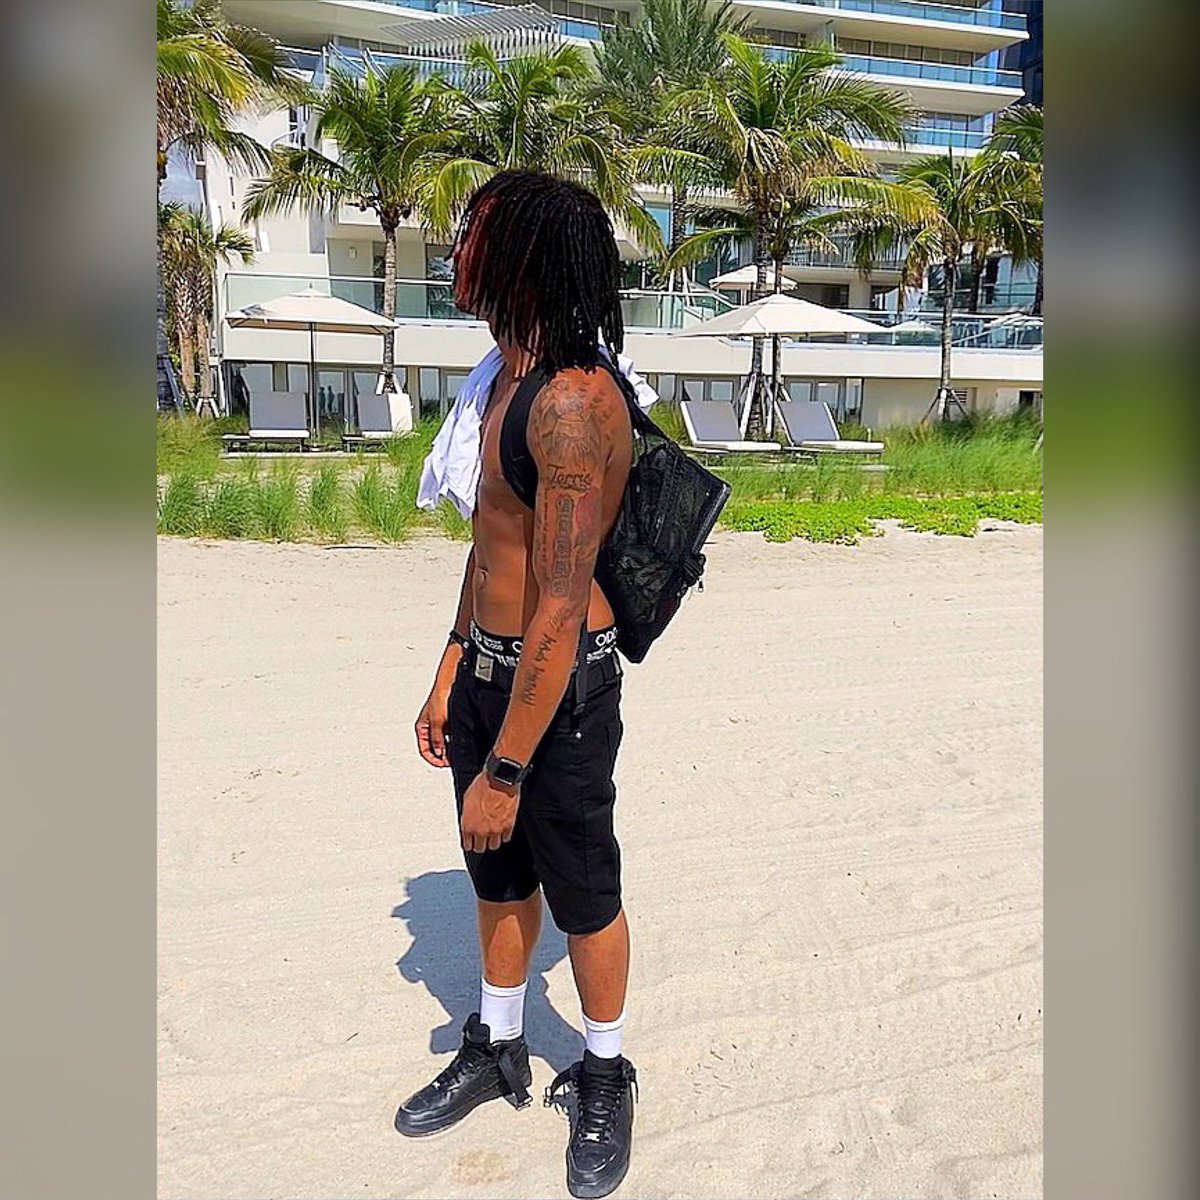 Betting on me is the right risk 🗣 Even in a f*cking crisis 😵‍💫 I’m never on some switching sides shit 💯 🏖 #miamitrip 🏝